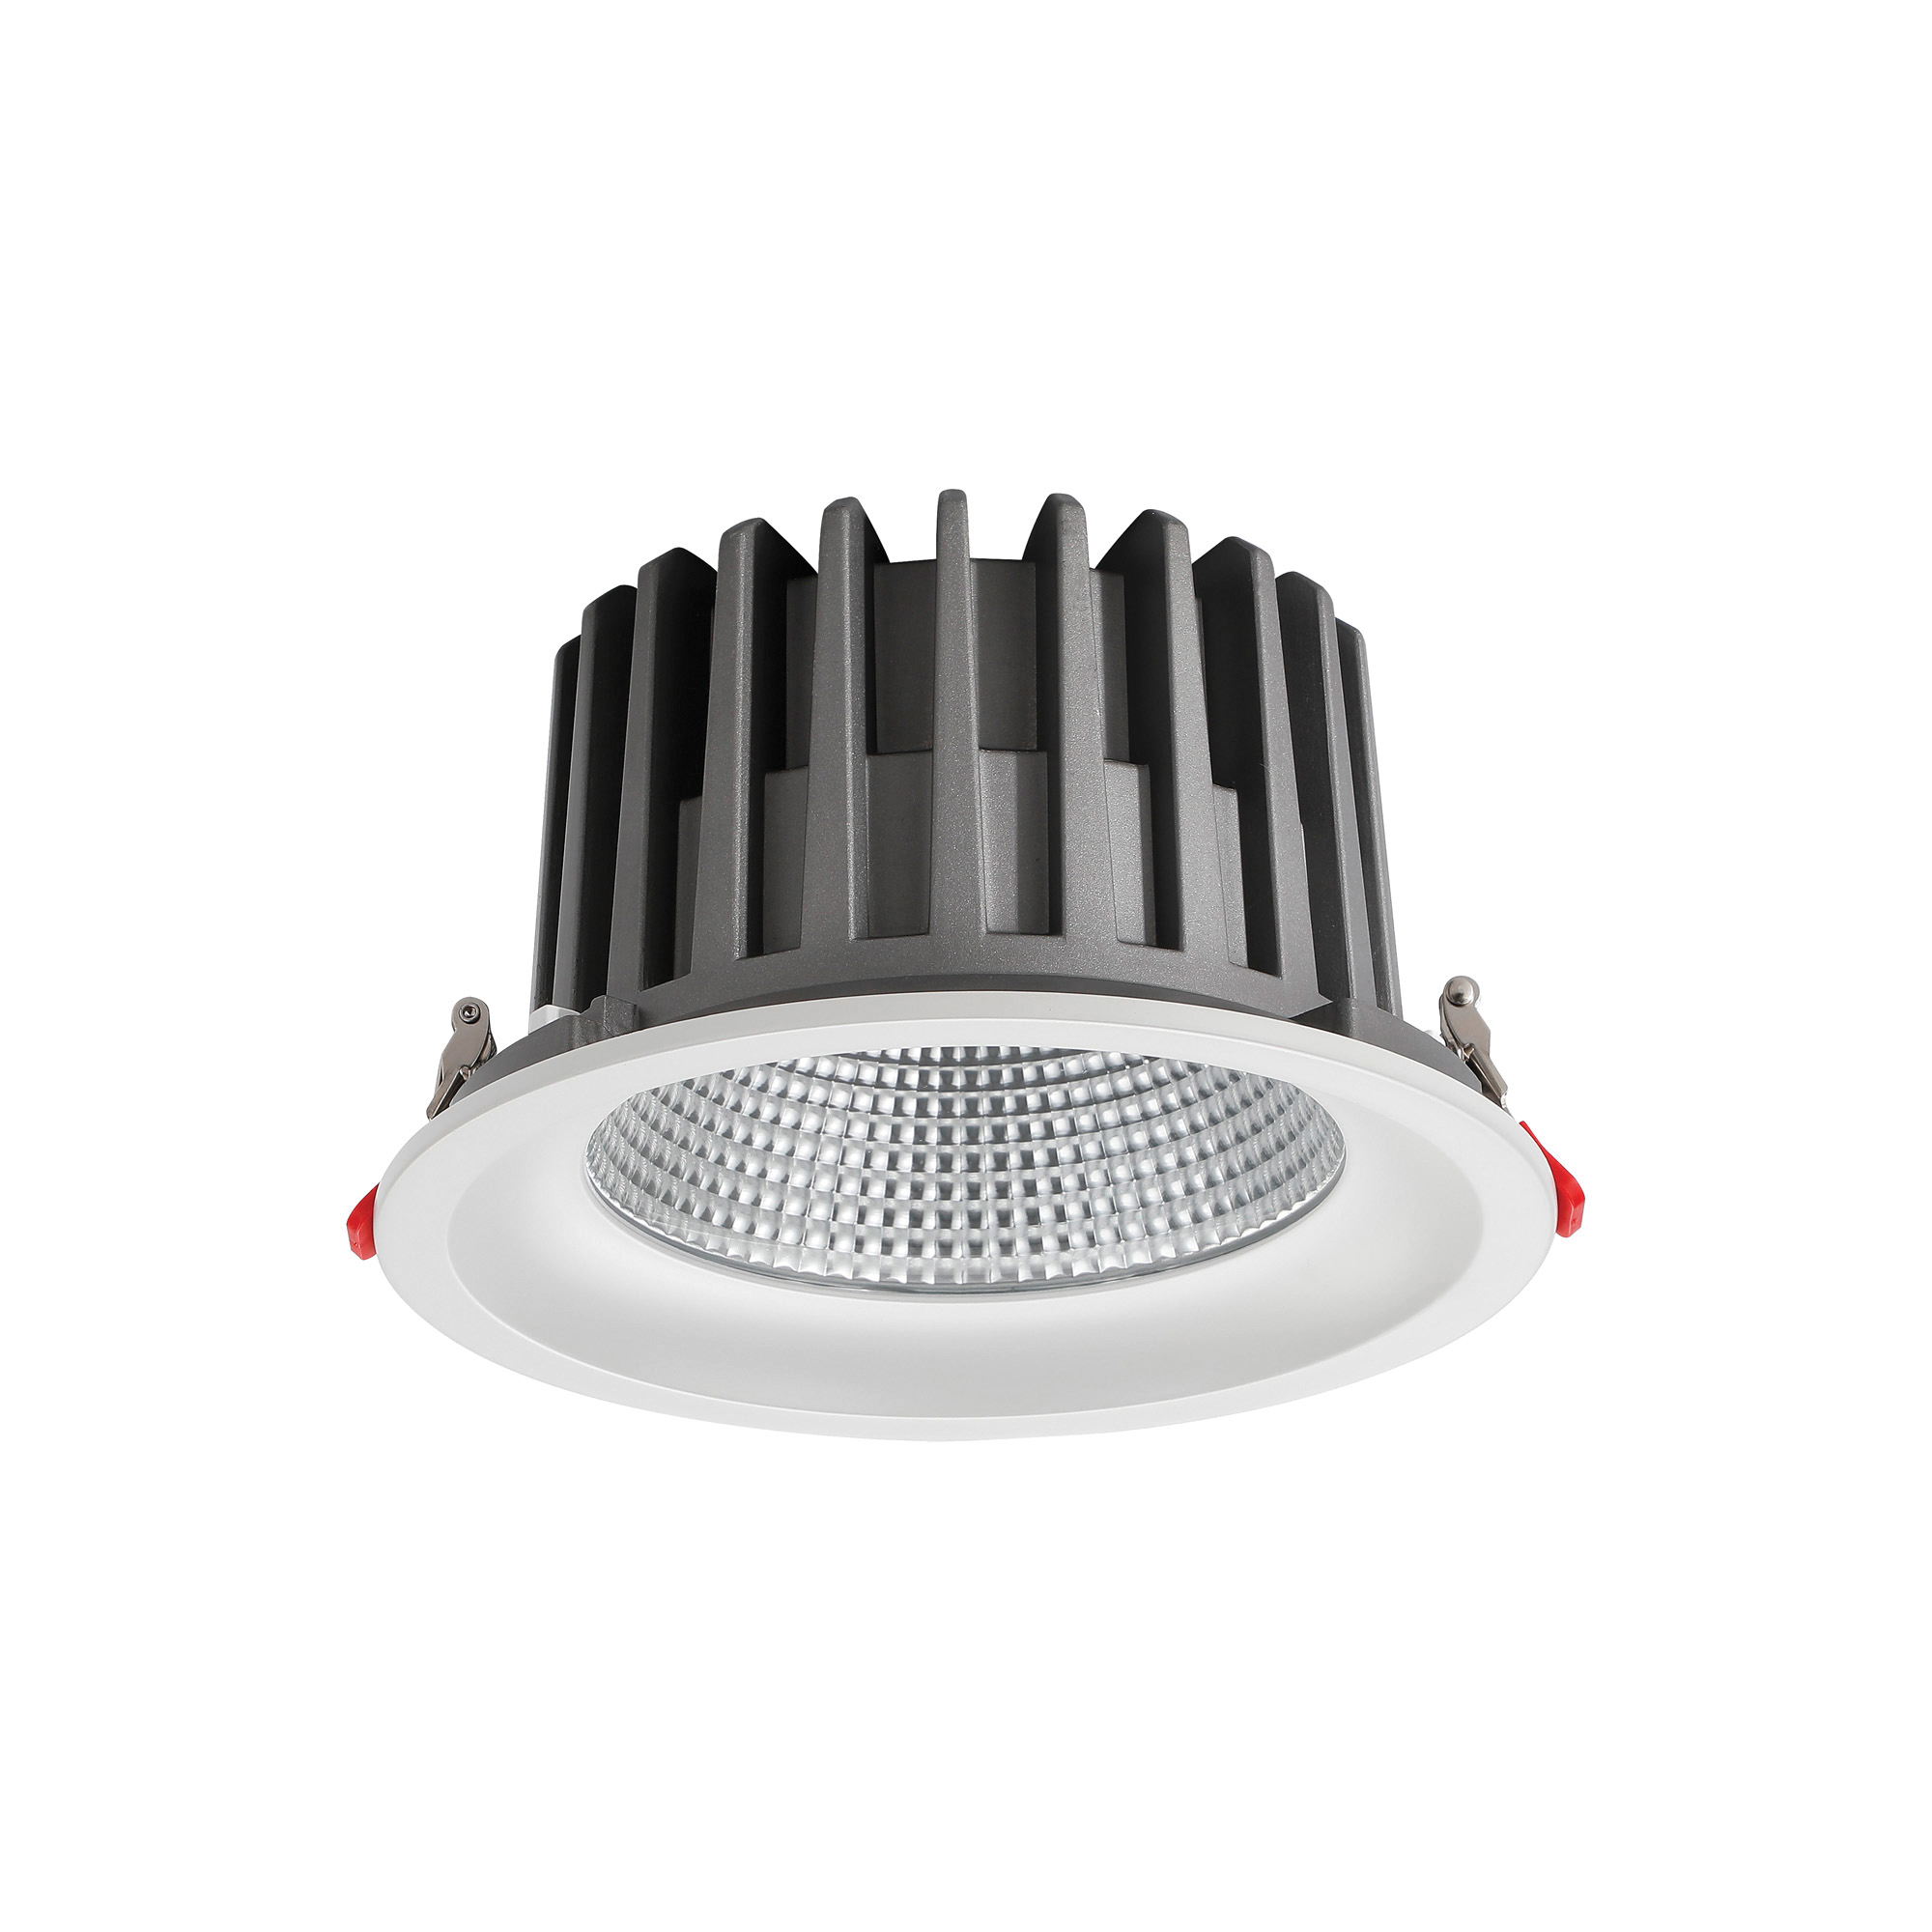 DL200067  Bionic 50; 50W; 1200mA; White Deep Round Recessed Downlight; 4380lm ;Cut Out 175mm; 50° ; 3000K; IP44; DRIVER INC.; 5yrs Warranty.